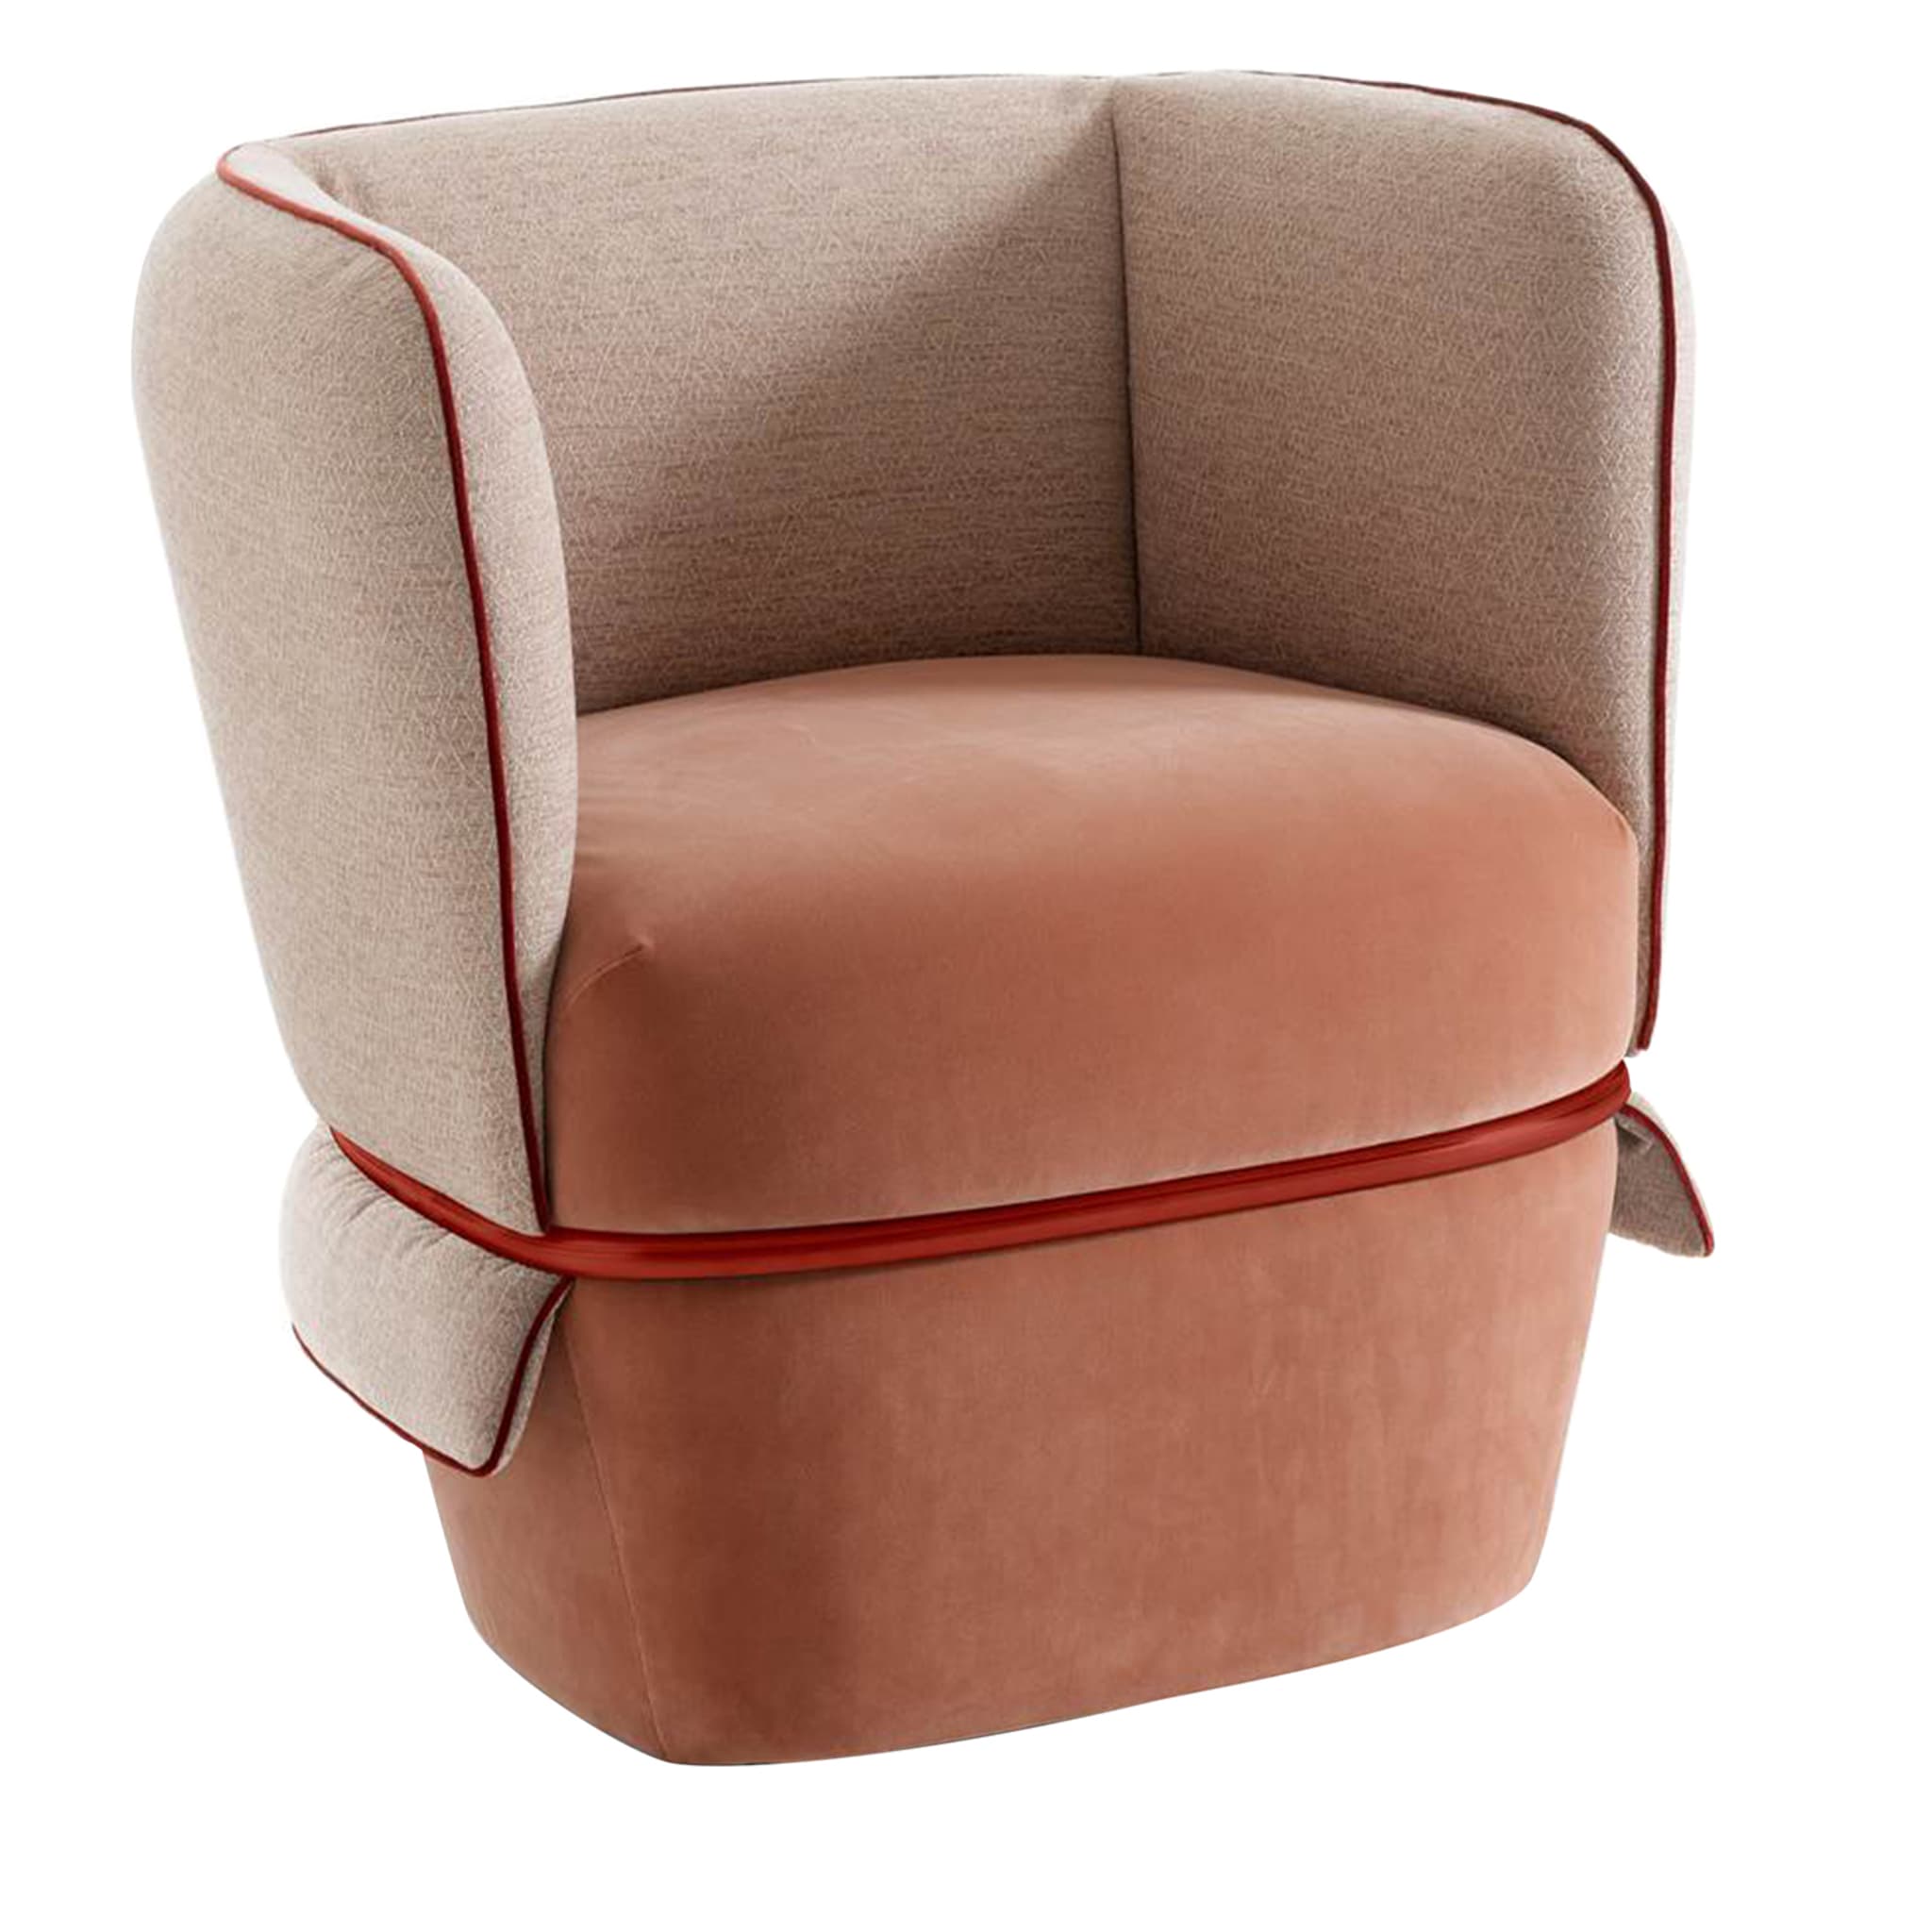 Chemise Pink and Beige Armchair by Studio LI_DO - Main view